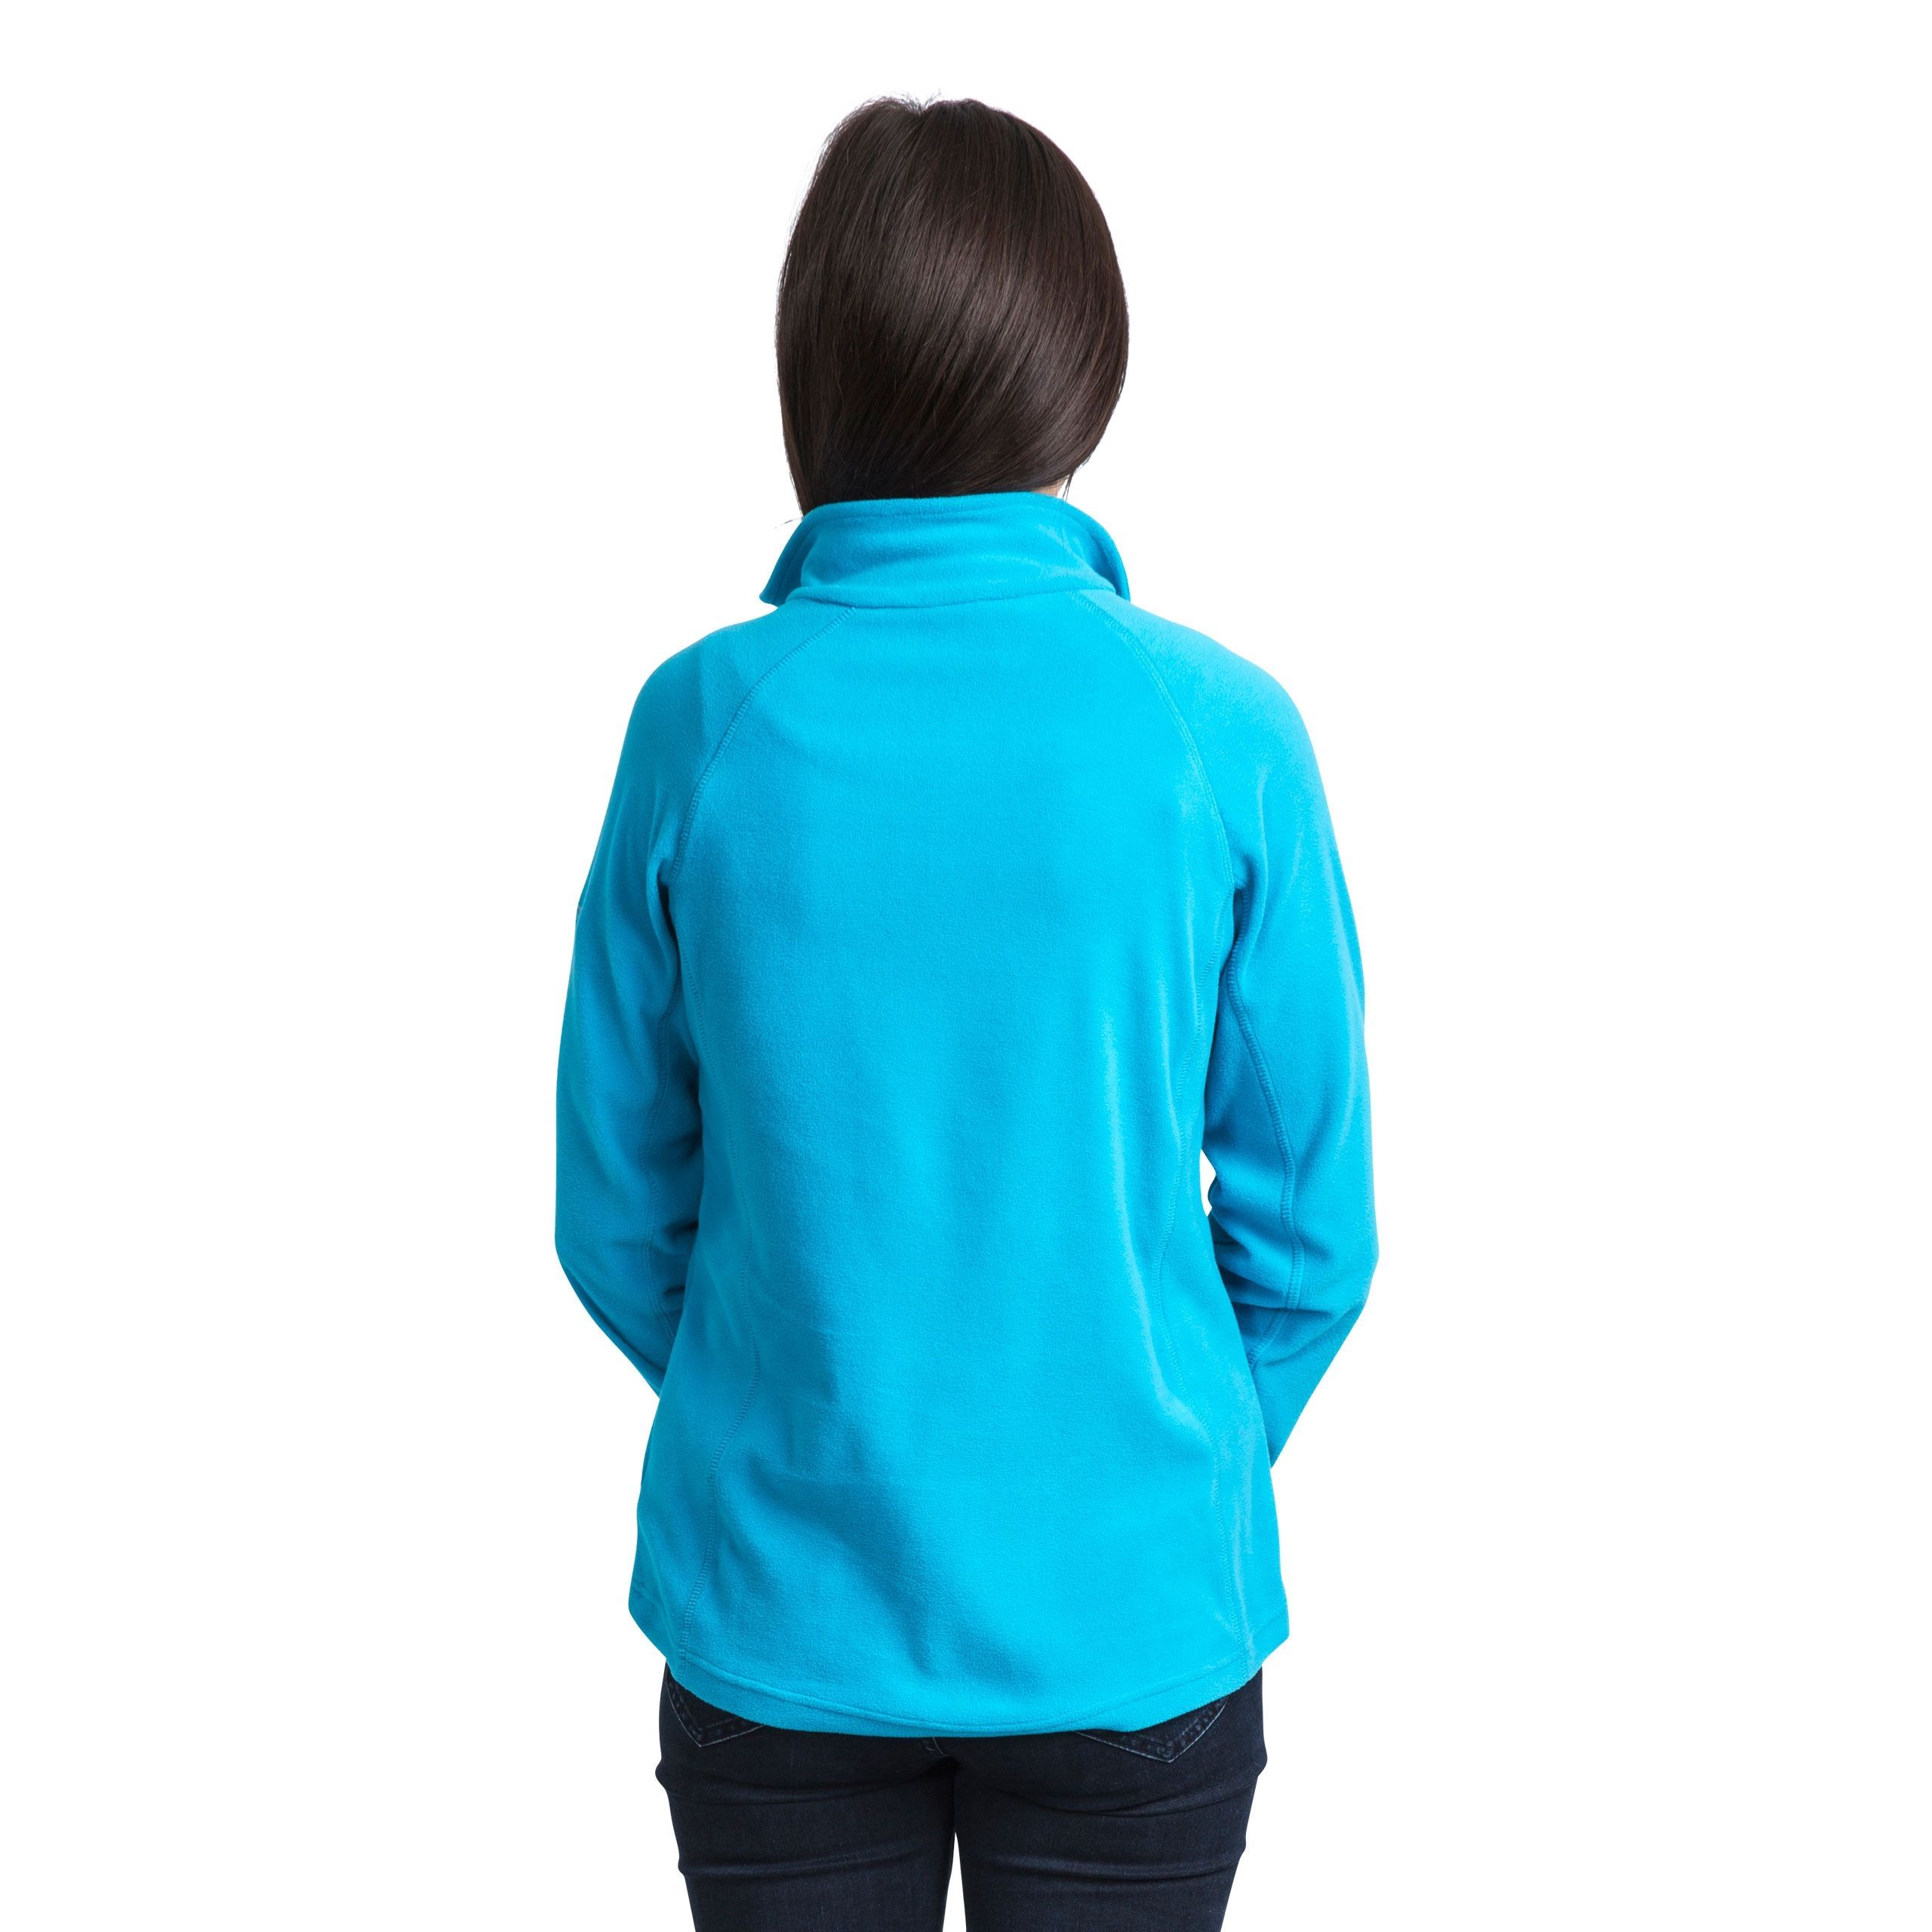 Ladies long sleeve fleece top. 130gsm Airtrap fleece build to trap and hold onto body heat. 1/2 zip neck. 100% Polyester. Trespass Womens Chest Sizing (approx): XS/8 - 32in/81cm, S/10 - 34in/86cm, M/12 - 36in/91.4cm, L/14 - 38in/96.5cm, XL/16 - 40in/101.5cm, XXL/18 - 42in/106.5cm.